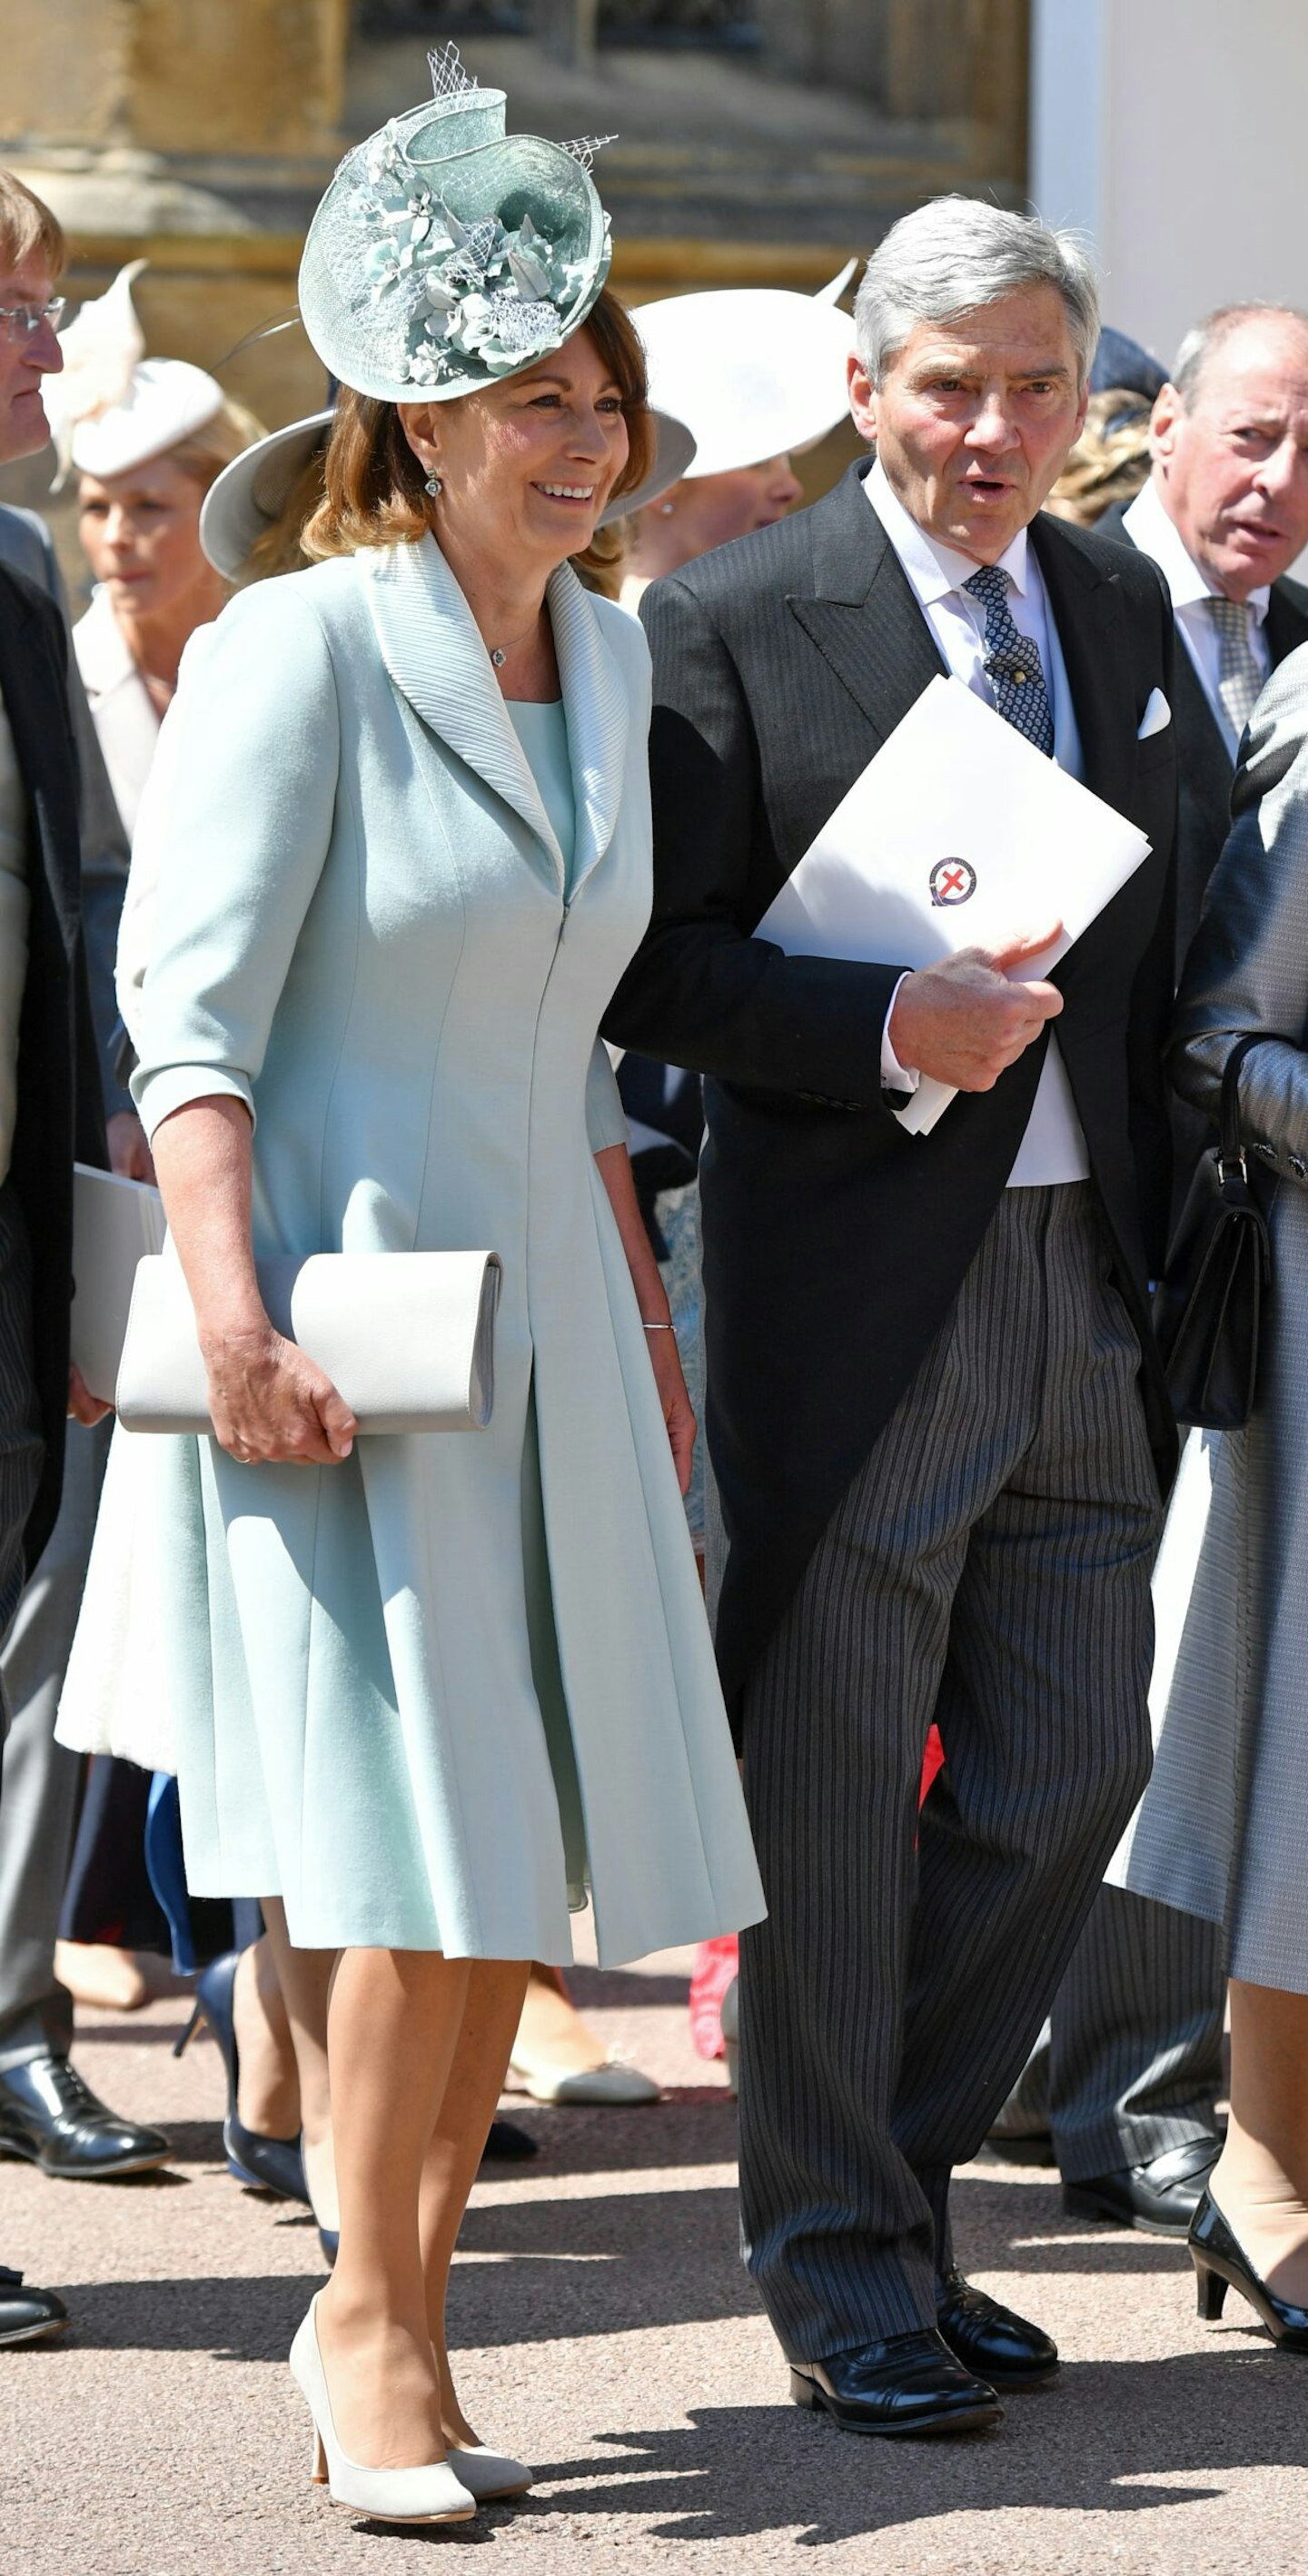 Carole Middleton at wedding of Prince Harry and Meghan